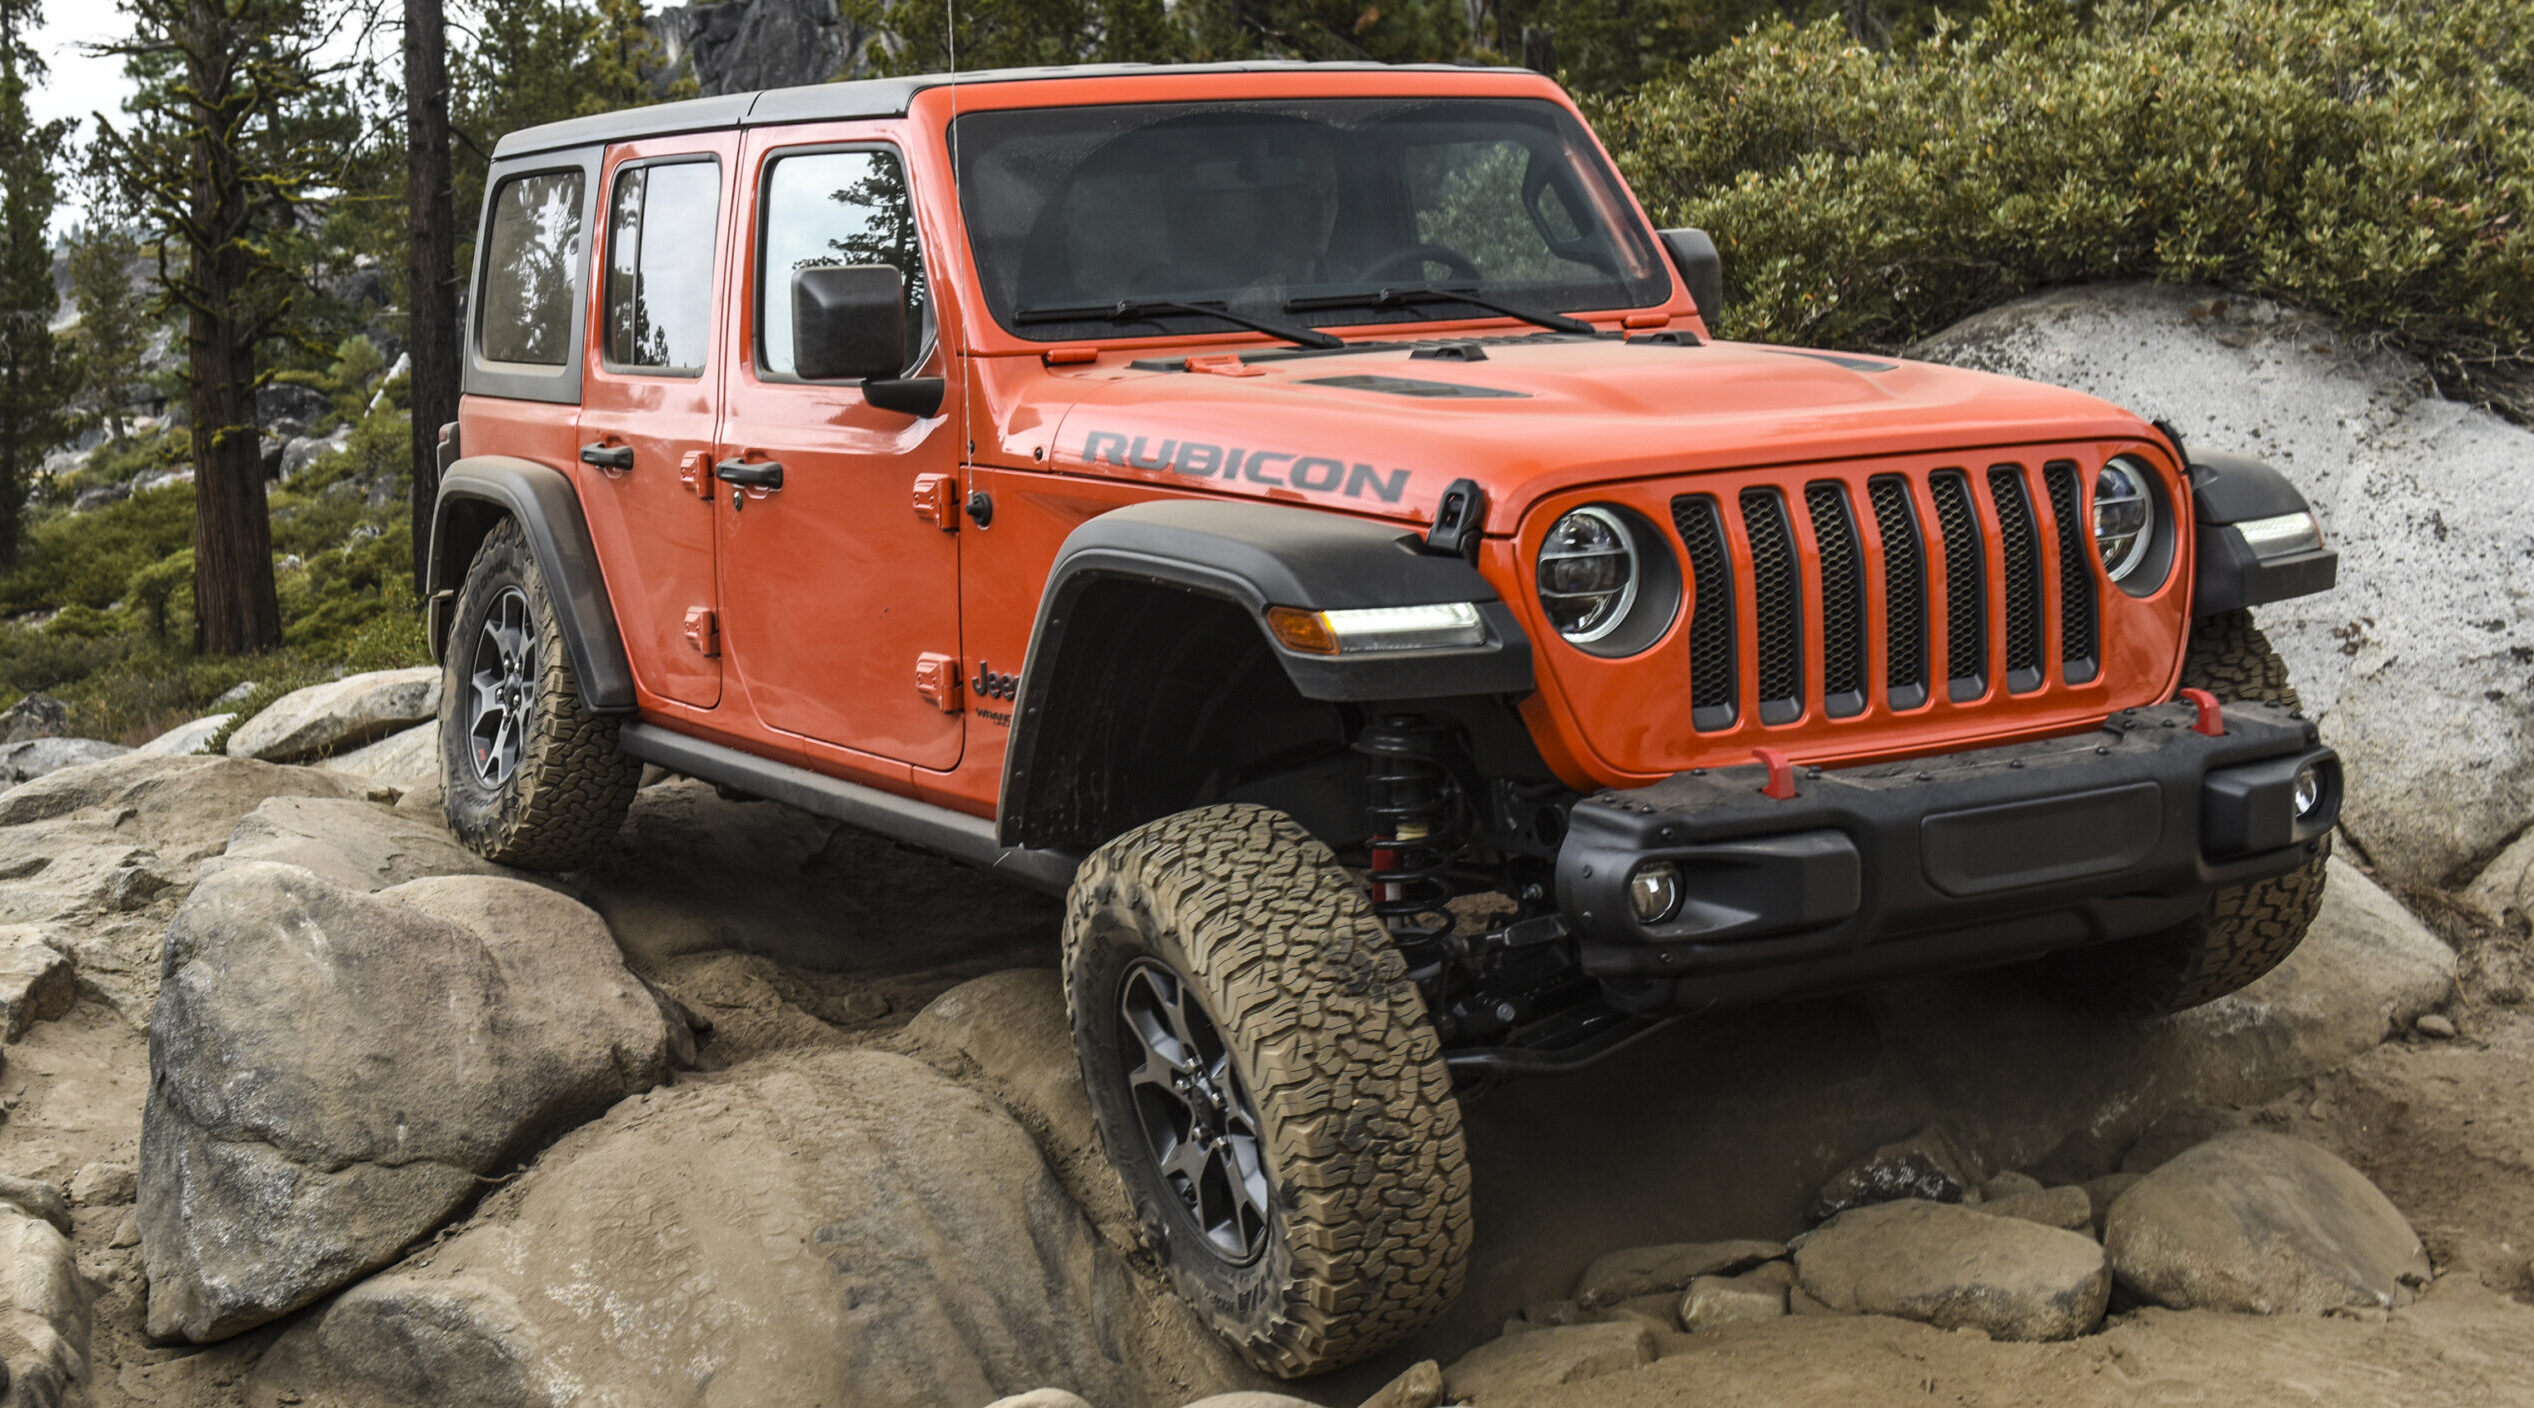 TRICK OR TREAT Jeep® Brand Brings Back Punk’n Exterior Paint Color To